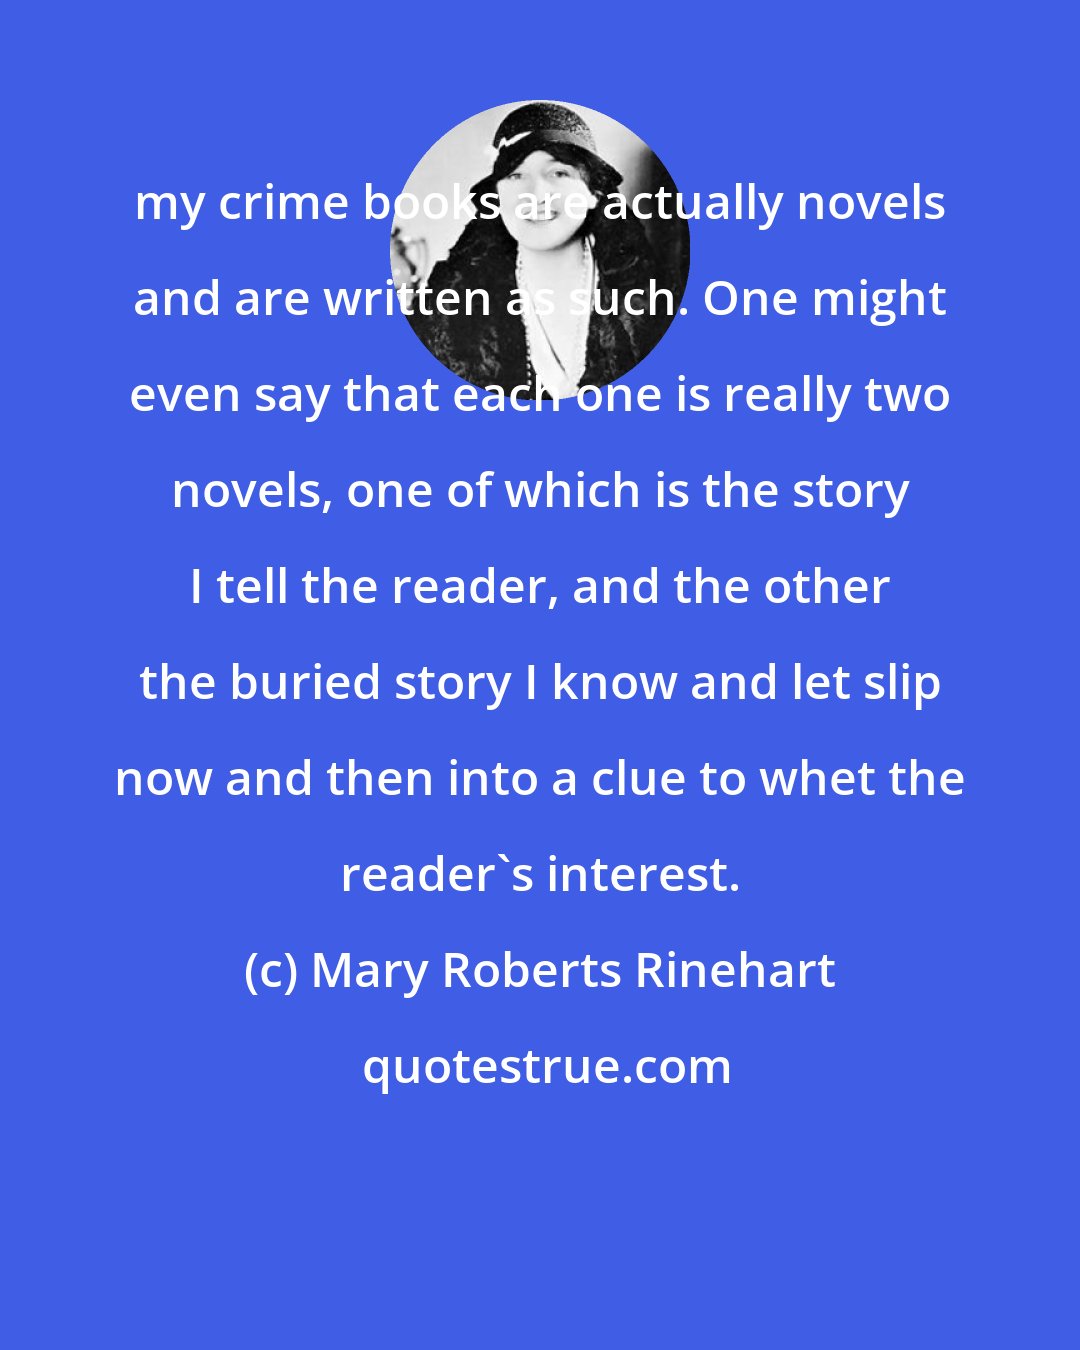 Mary Roberts Rinehart: my crime books are actually novels and are written as such. One might even say that each one is really two novels, one of which is the story I tell the reader, and the other the buried story I know and let slip now and then into a clue to whet the reader's interest.